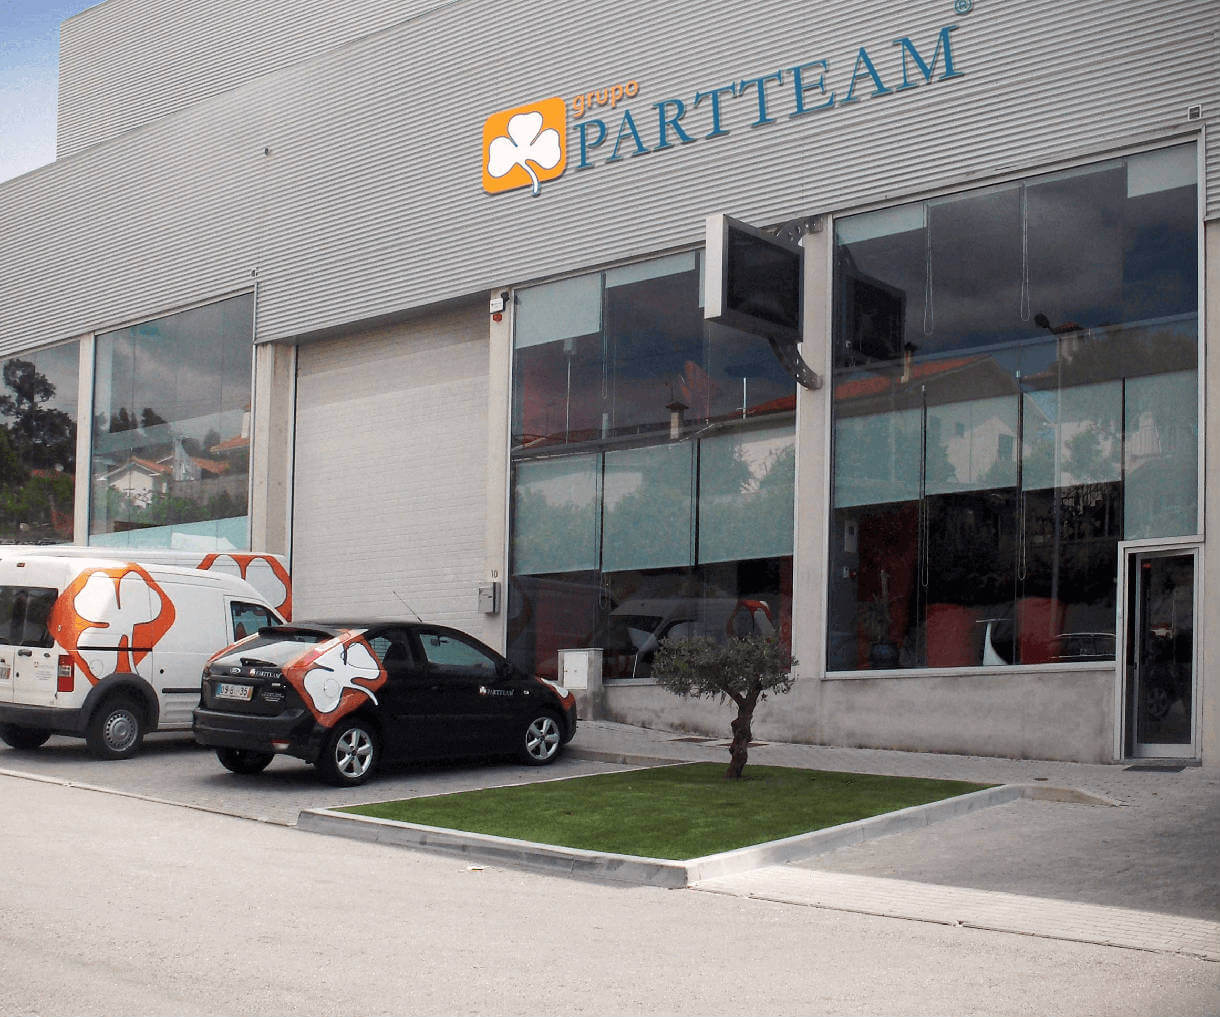 PARTTEAM & OEMKIOSKS Group